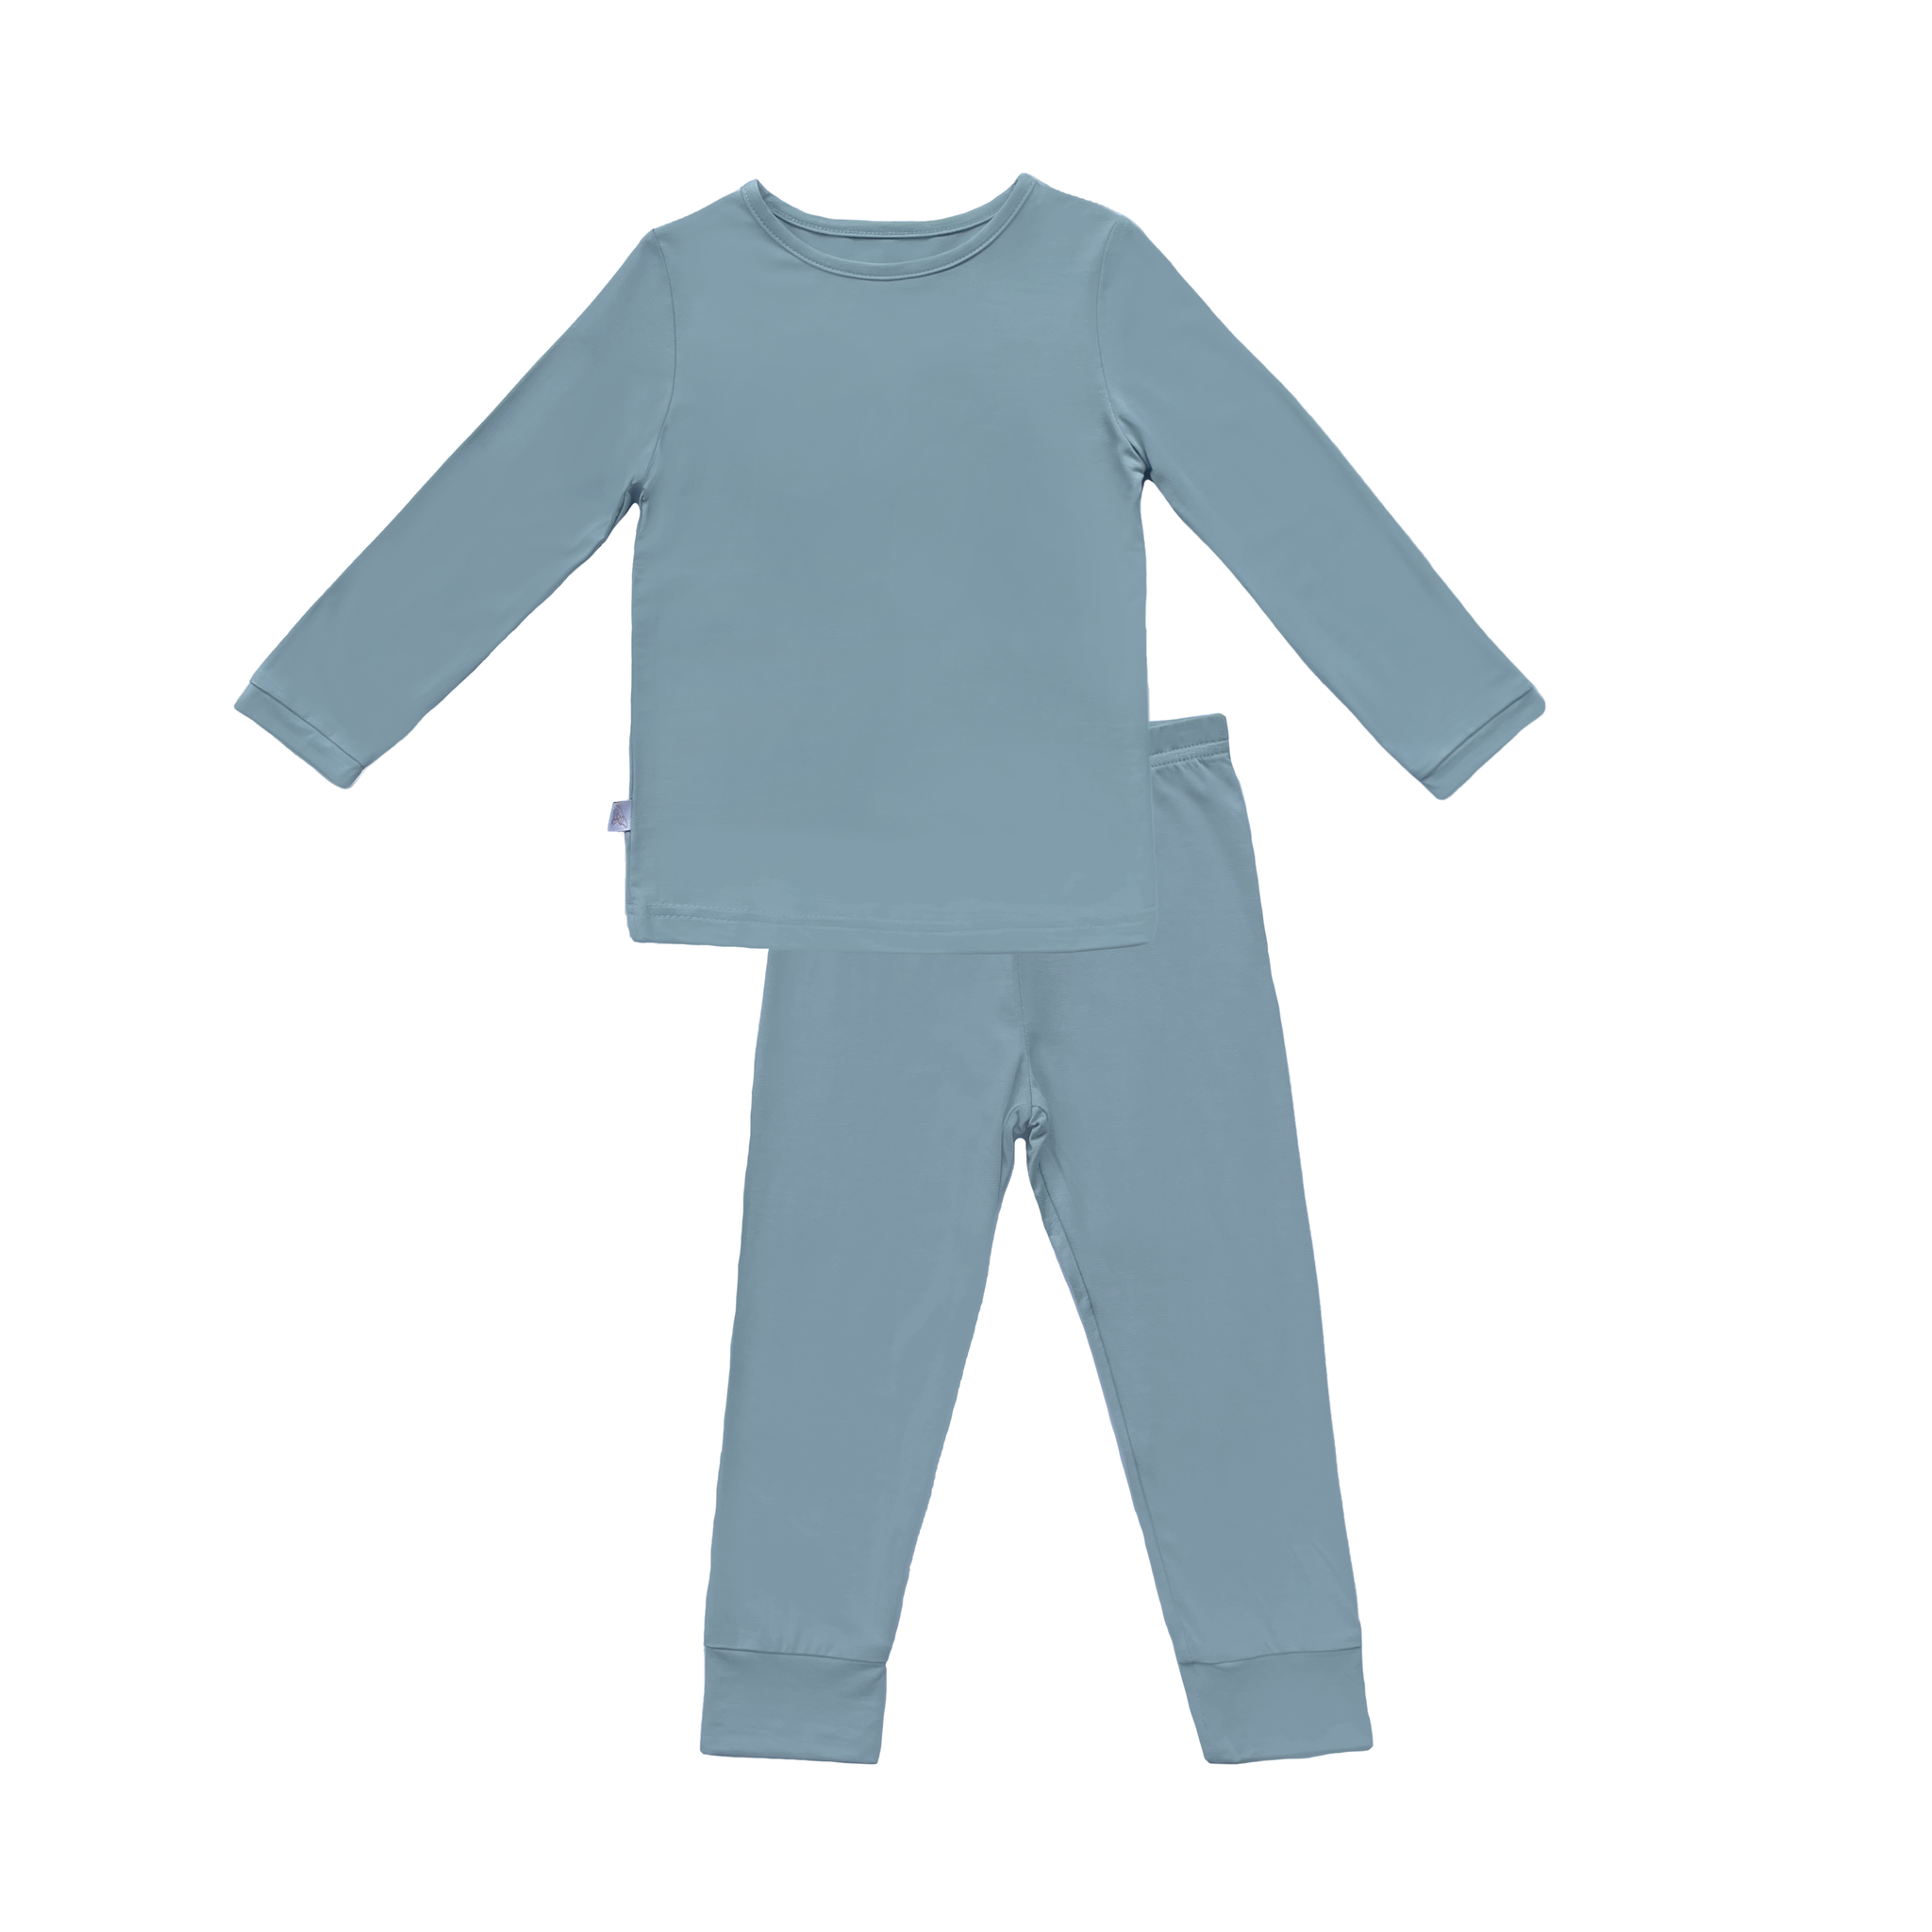 These Tiny Things Two-Piece Toddler PJs